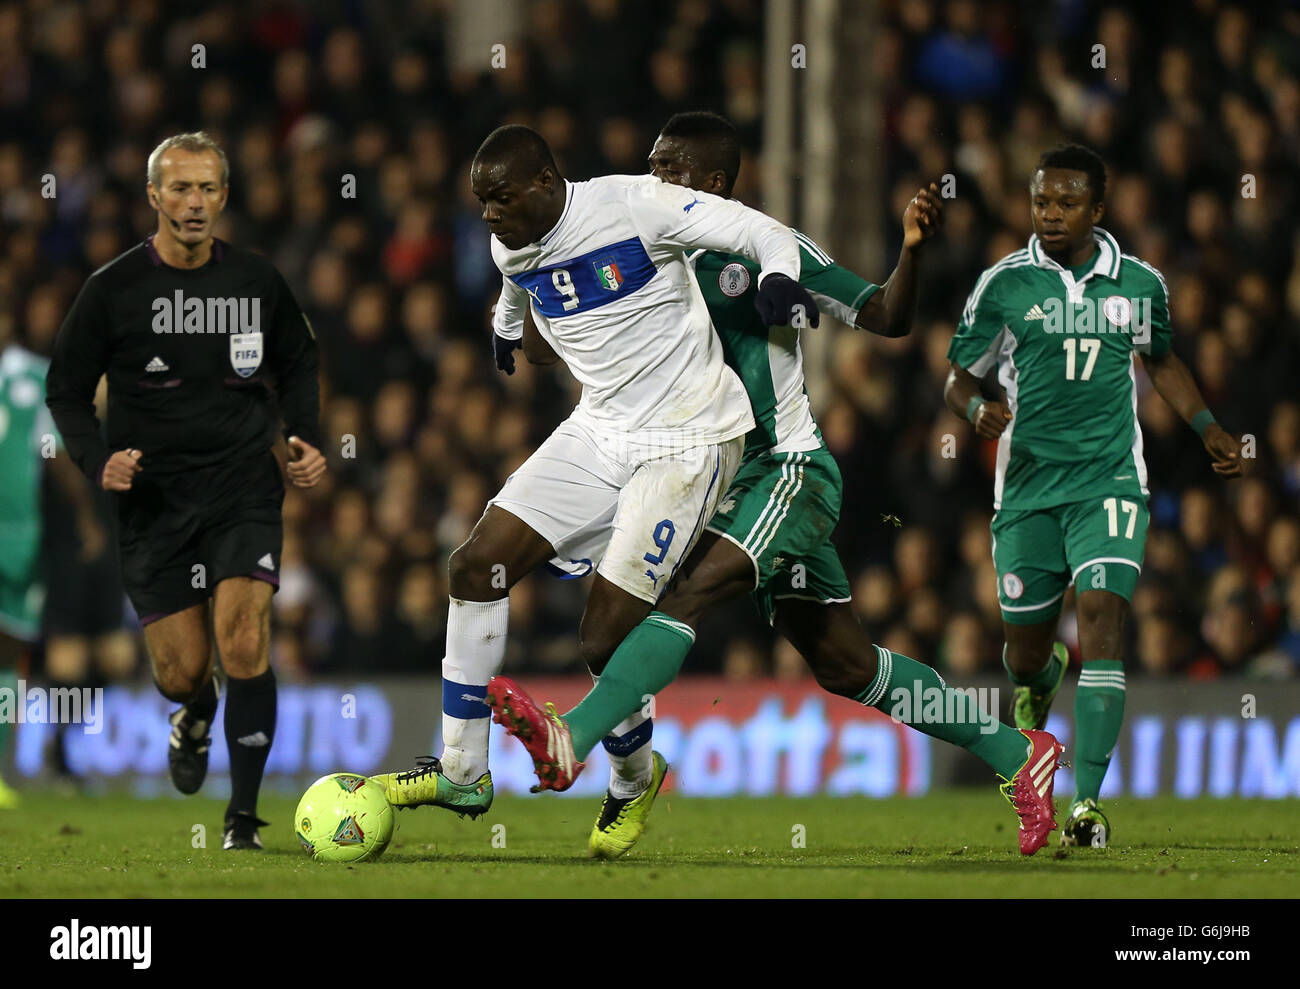 Italy's Mario Balotelli (left) is tackled by Nigeria's John Ogu during the International Friendly at Craven Cottage, London. Stock Photo